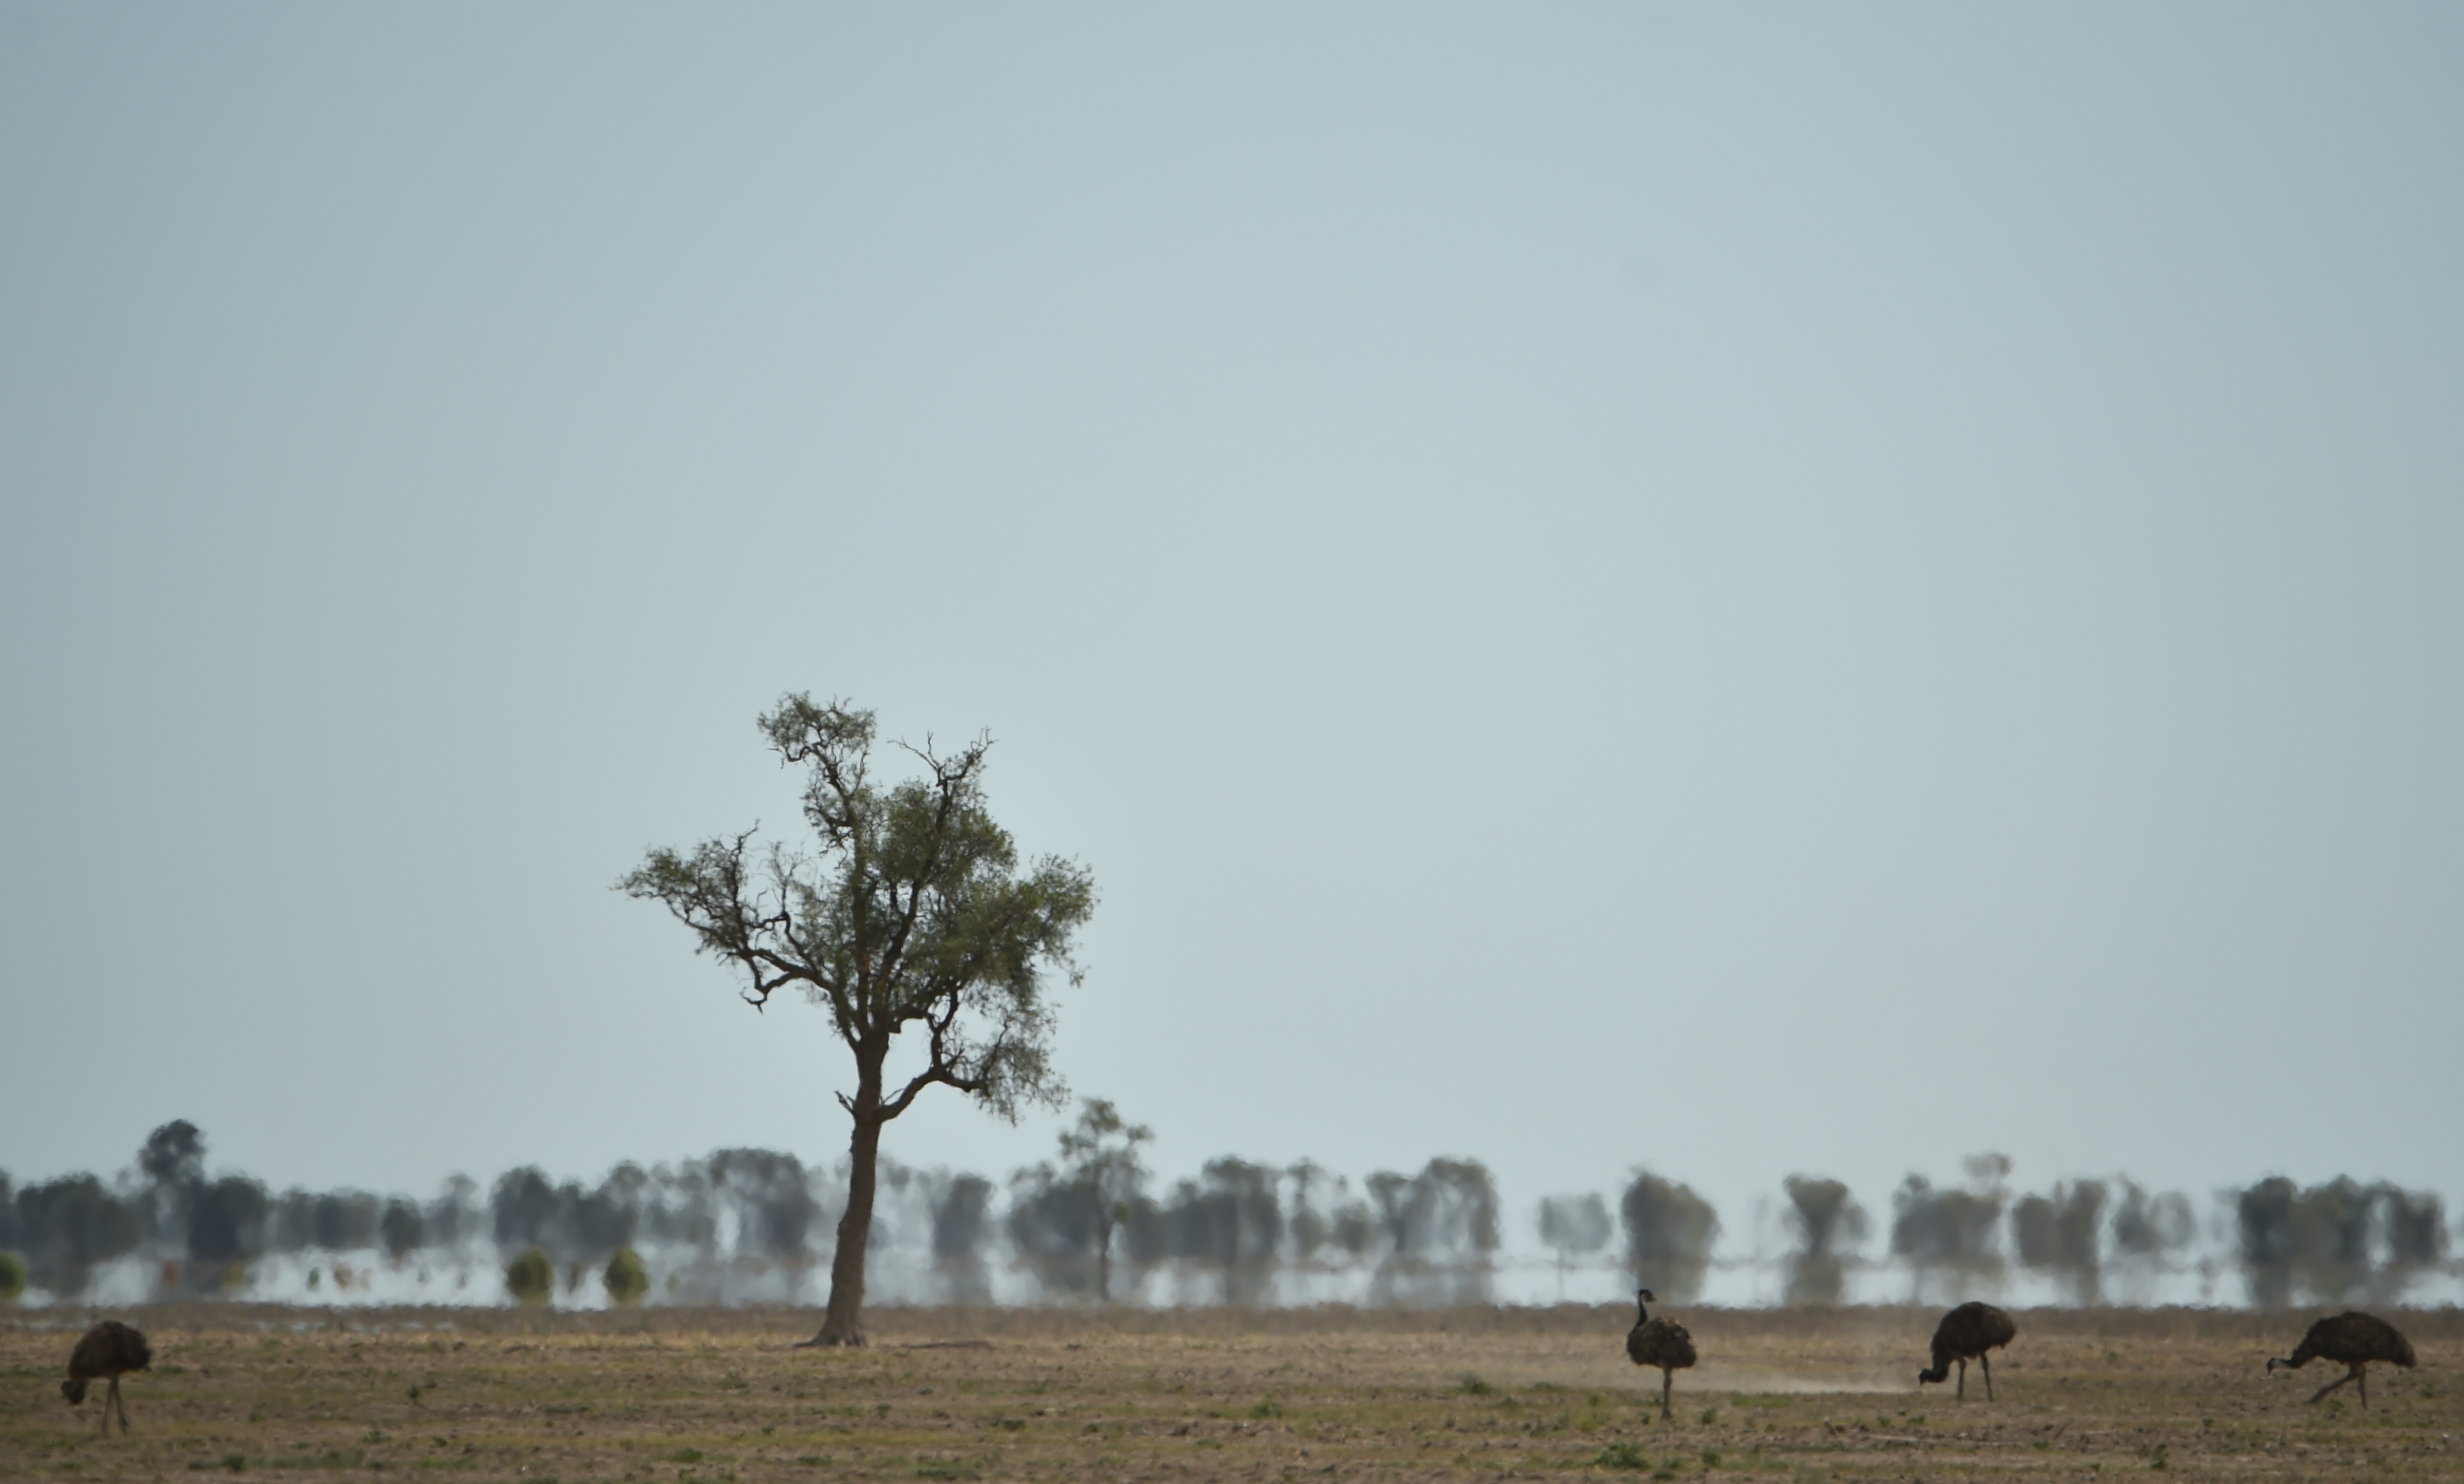 (FILES)-- This file photo taken on February 12, 2015 shows emus, an Australian flightless bird, looking for food in the dry earth near the Australian agricultural town of Walgett, 650 kilometres northwest of Sydney. Australia is set to experience more heatwaves, with record-breaking hot weather becoming "normal" across the continent as climate change pushes up land and sea temperatures, a government report warned on October 27. / AFP PHOTO / PETER PARKS